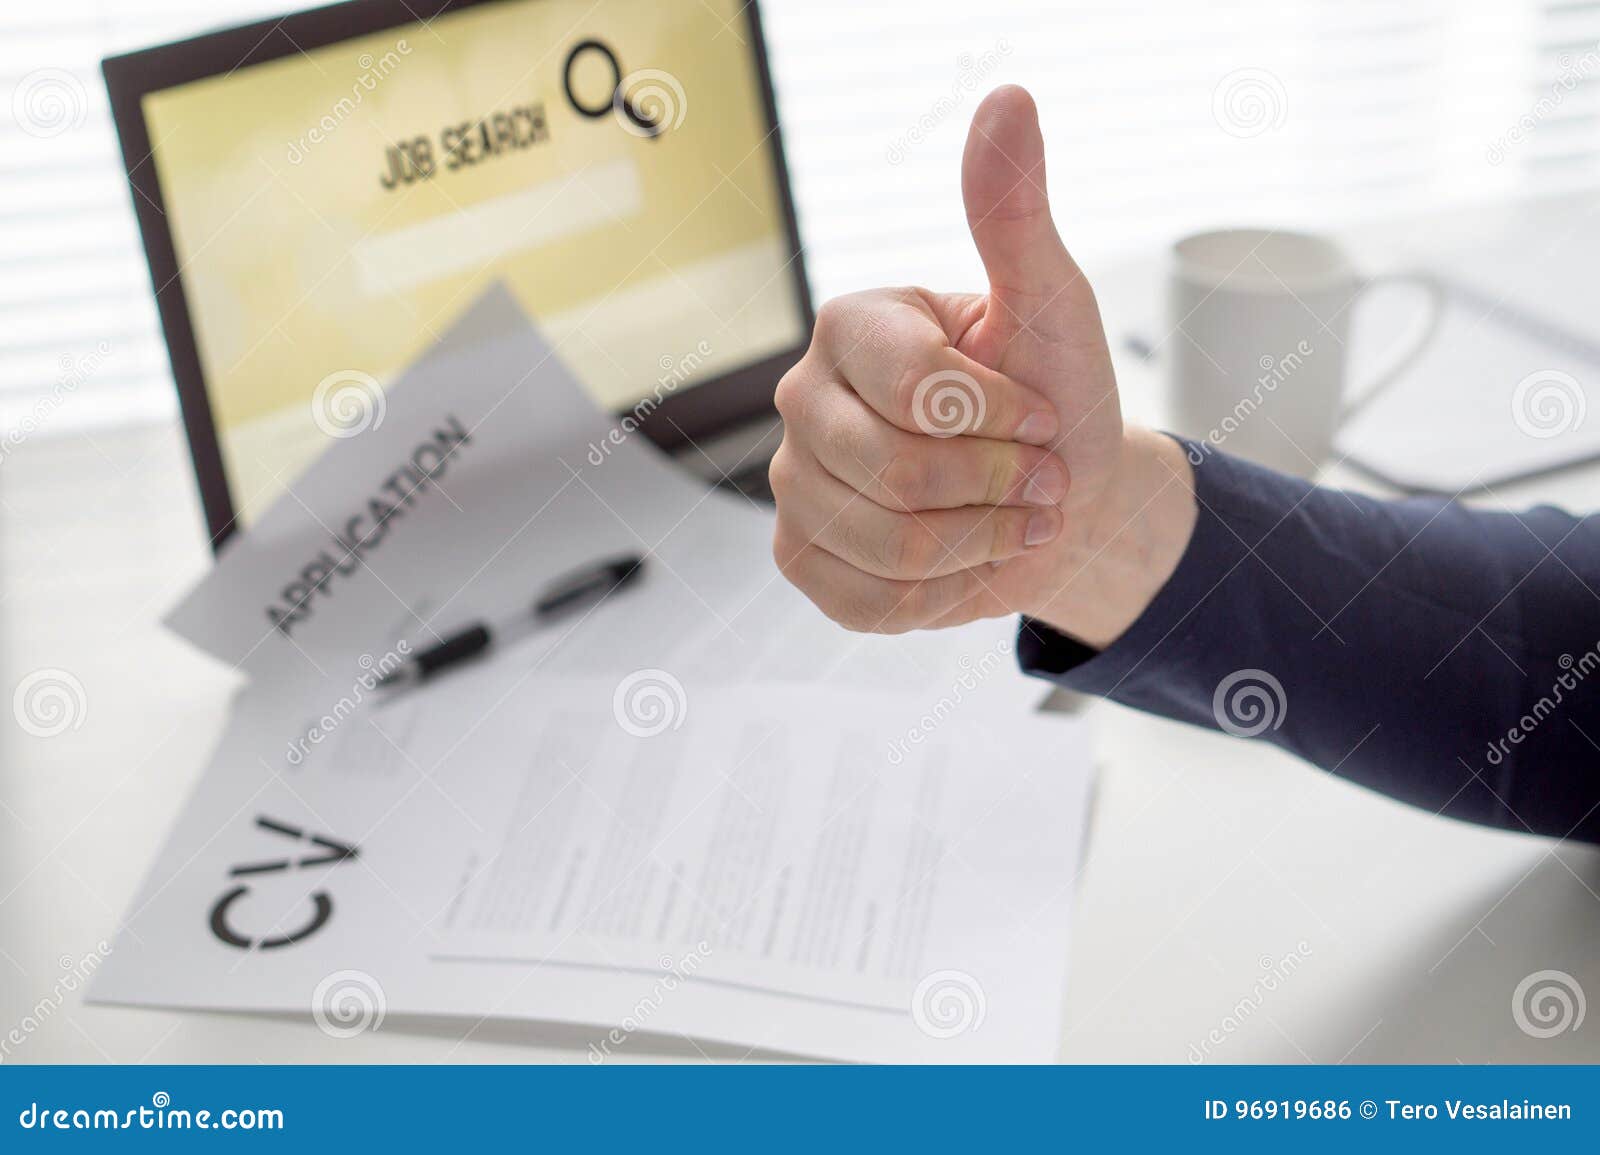 thumbs up for job search. applicant with positive attitude. happy jobseeker. cheerful man pleased with finding work.